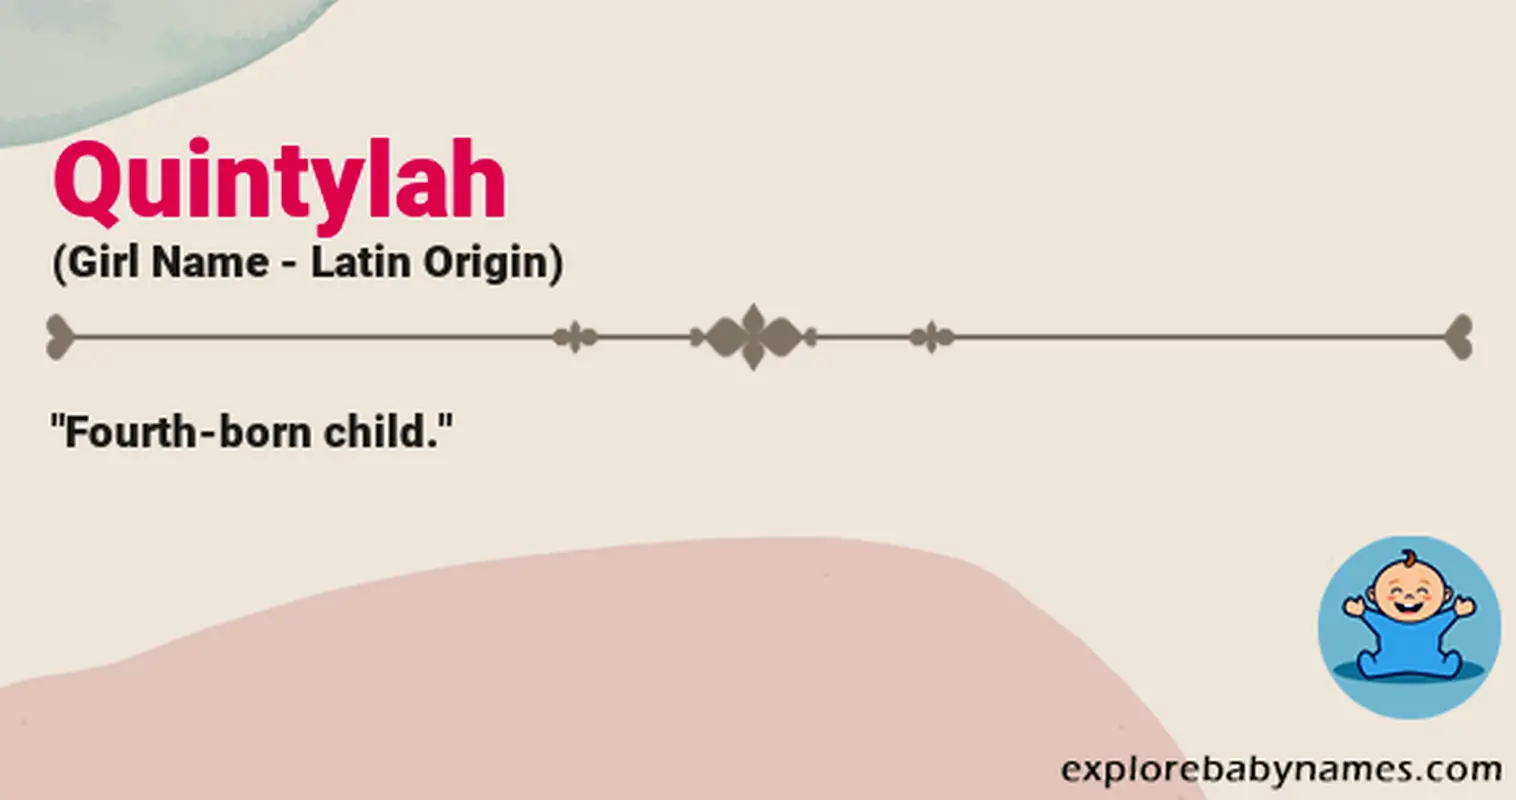 Meaning of Quintylah